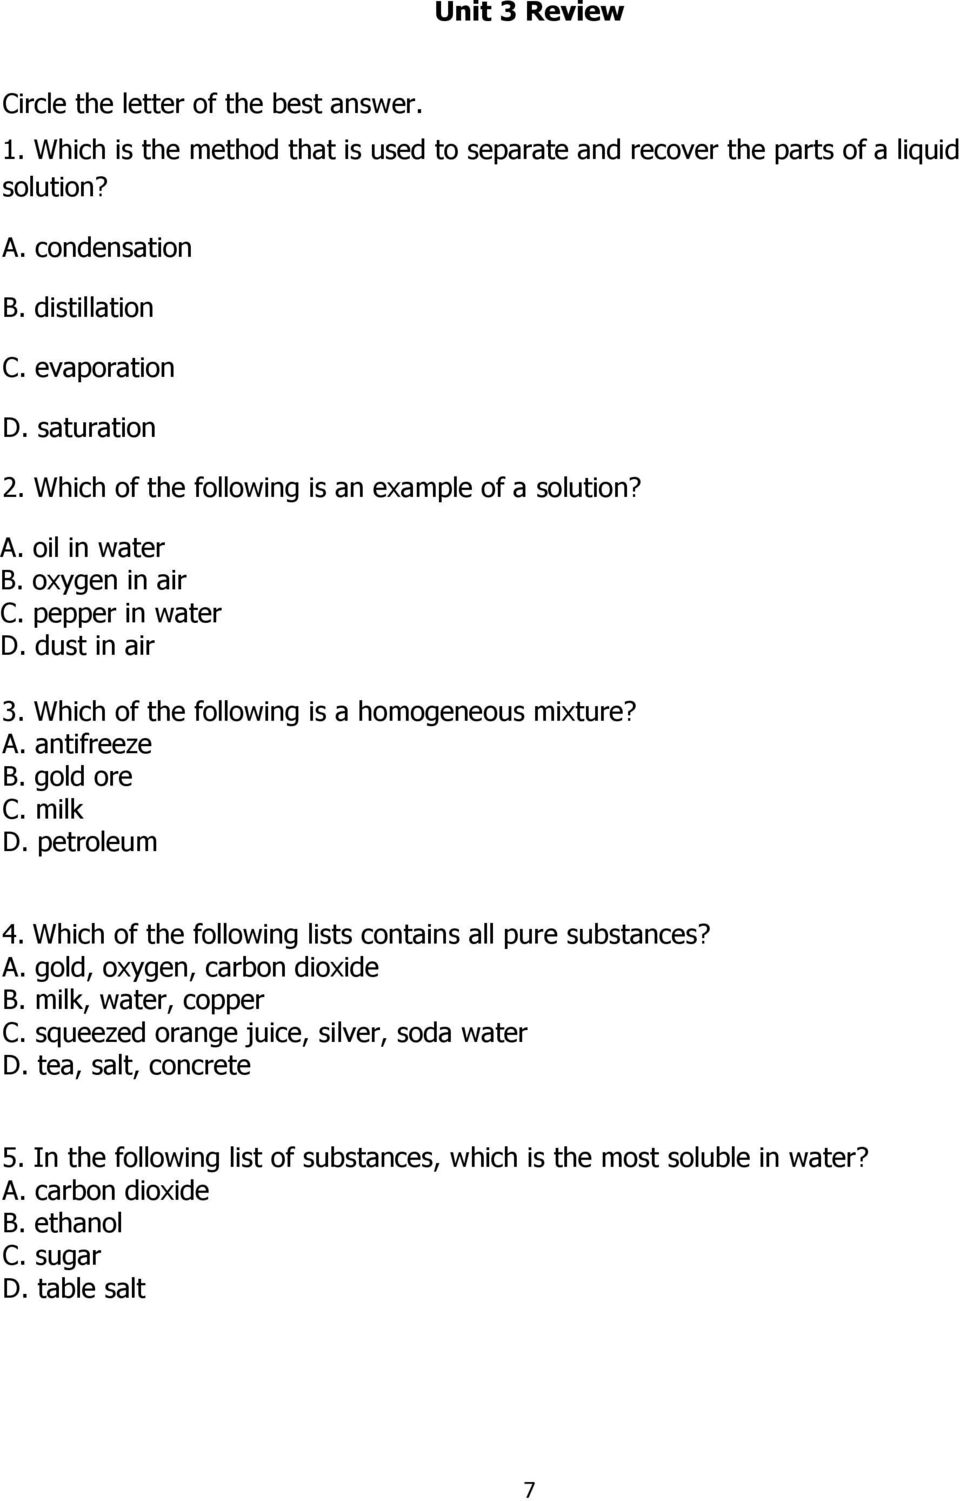 chapter 22 mixtures and solutions worksheet answers Pertaining To Mixtures And Solutions Worksheet Answers